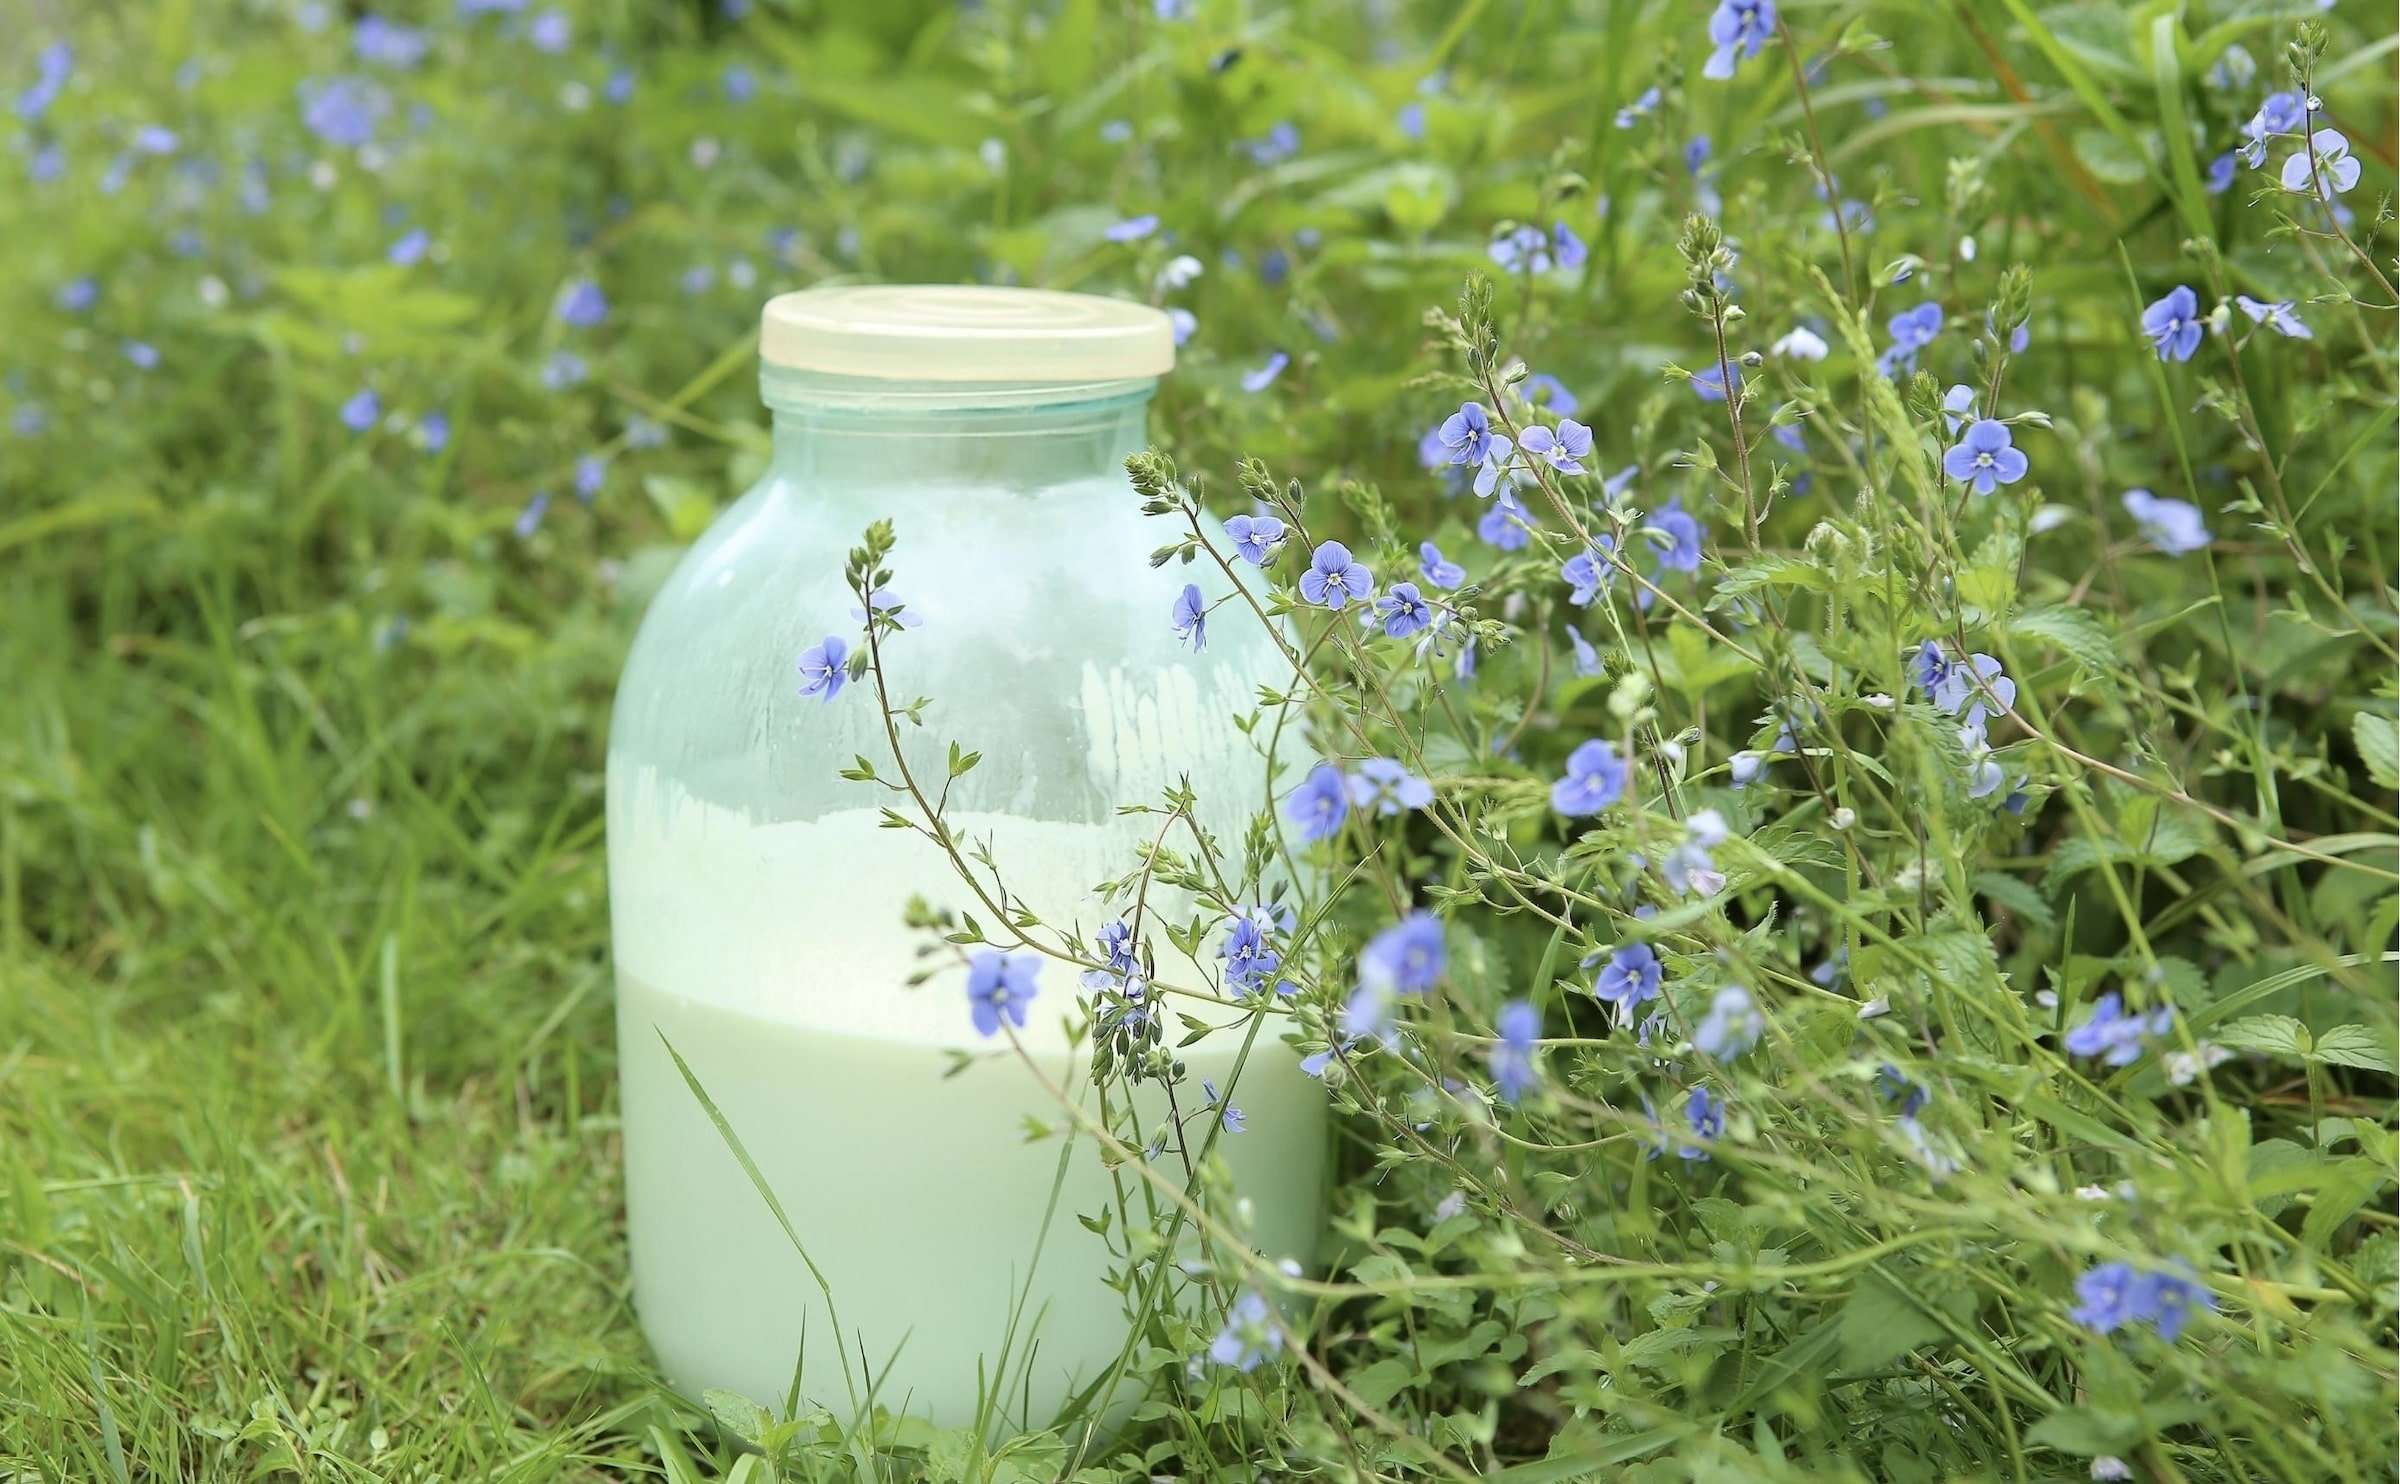 Glass jar of raw milk sitting out in field of wildflowers.